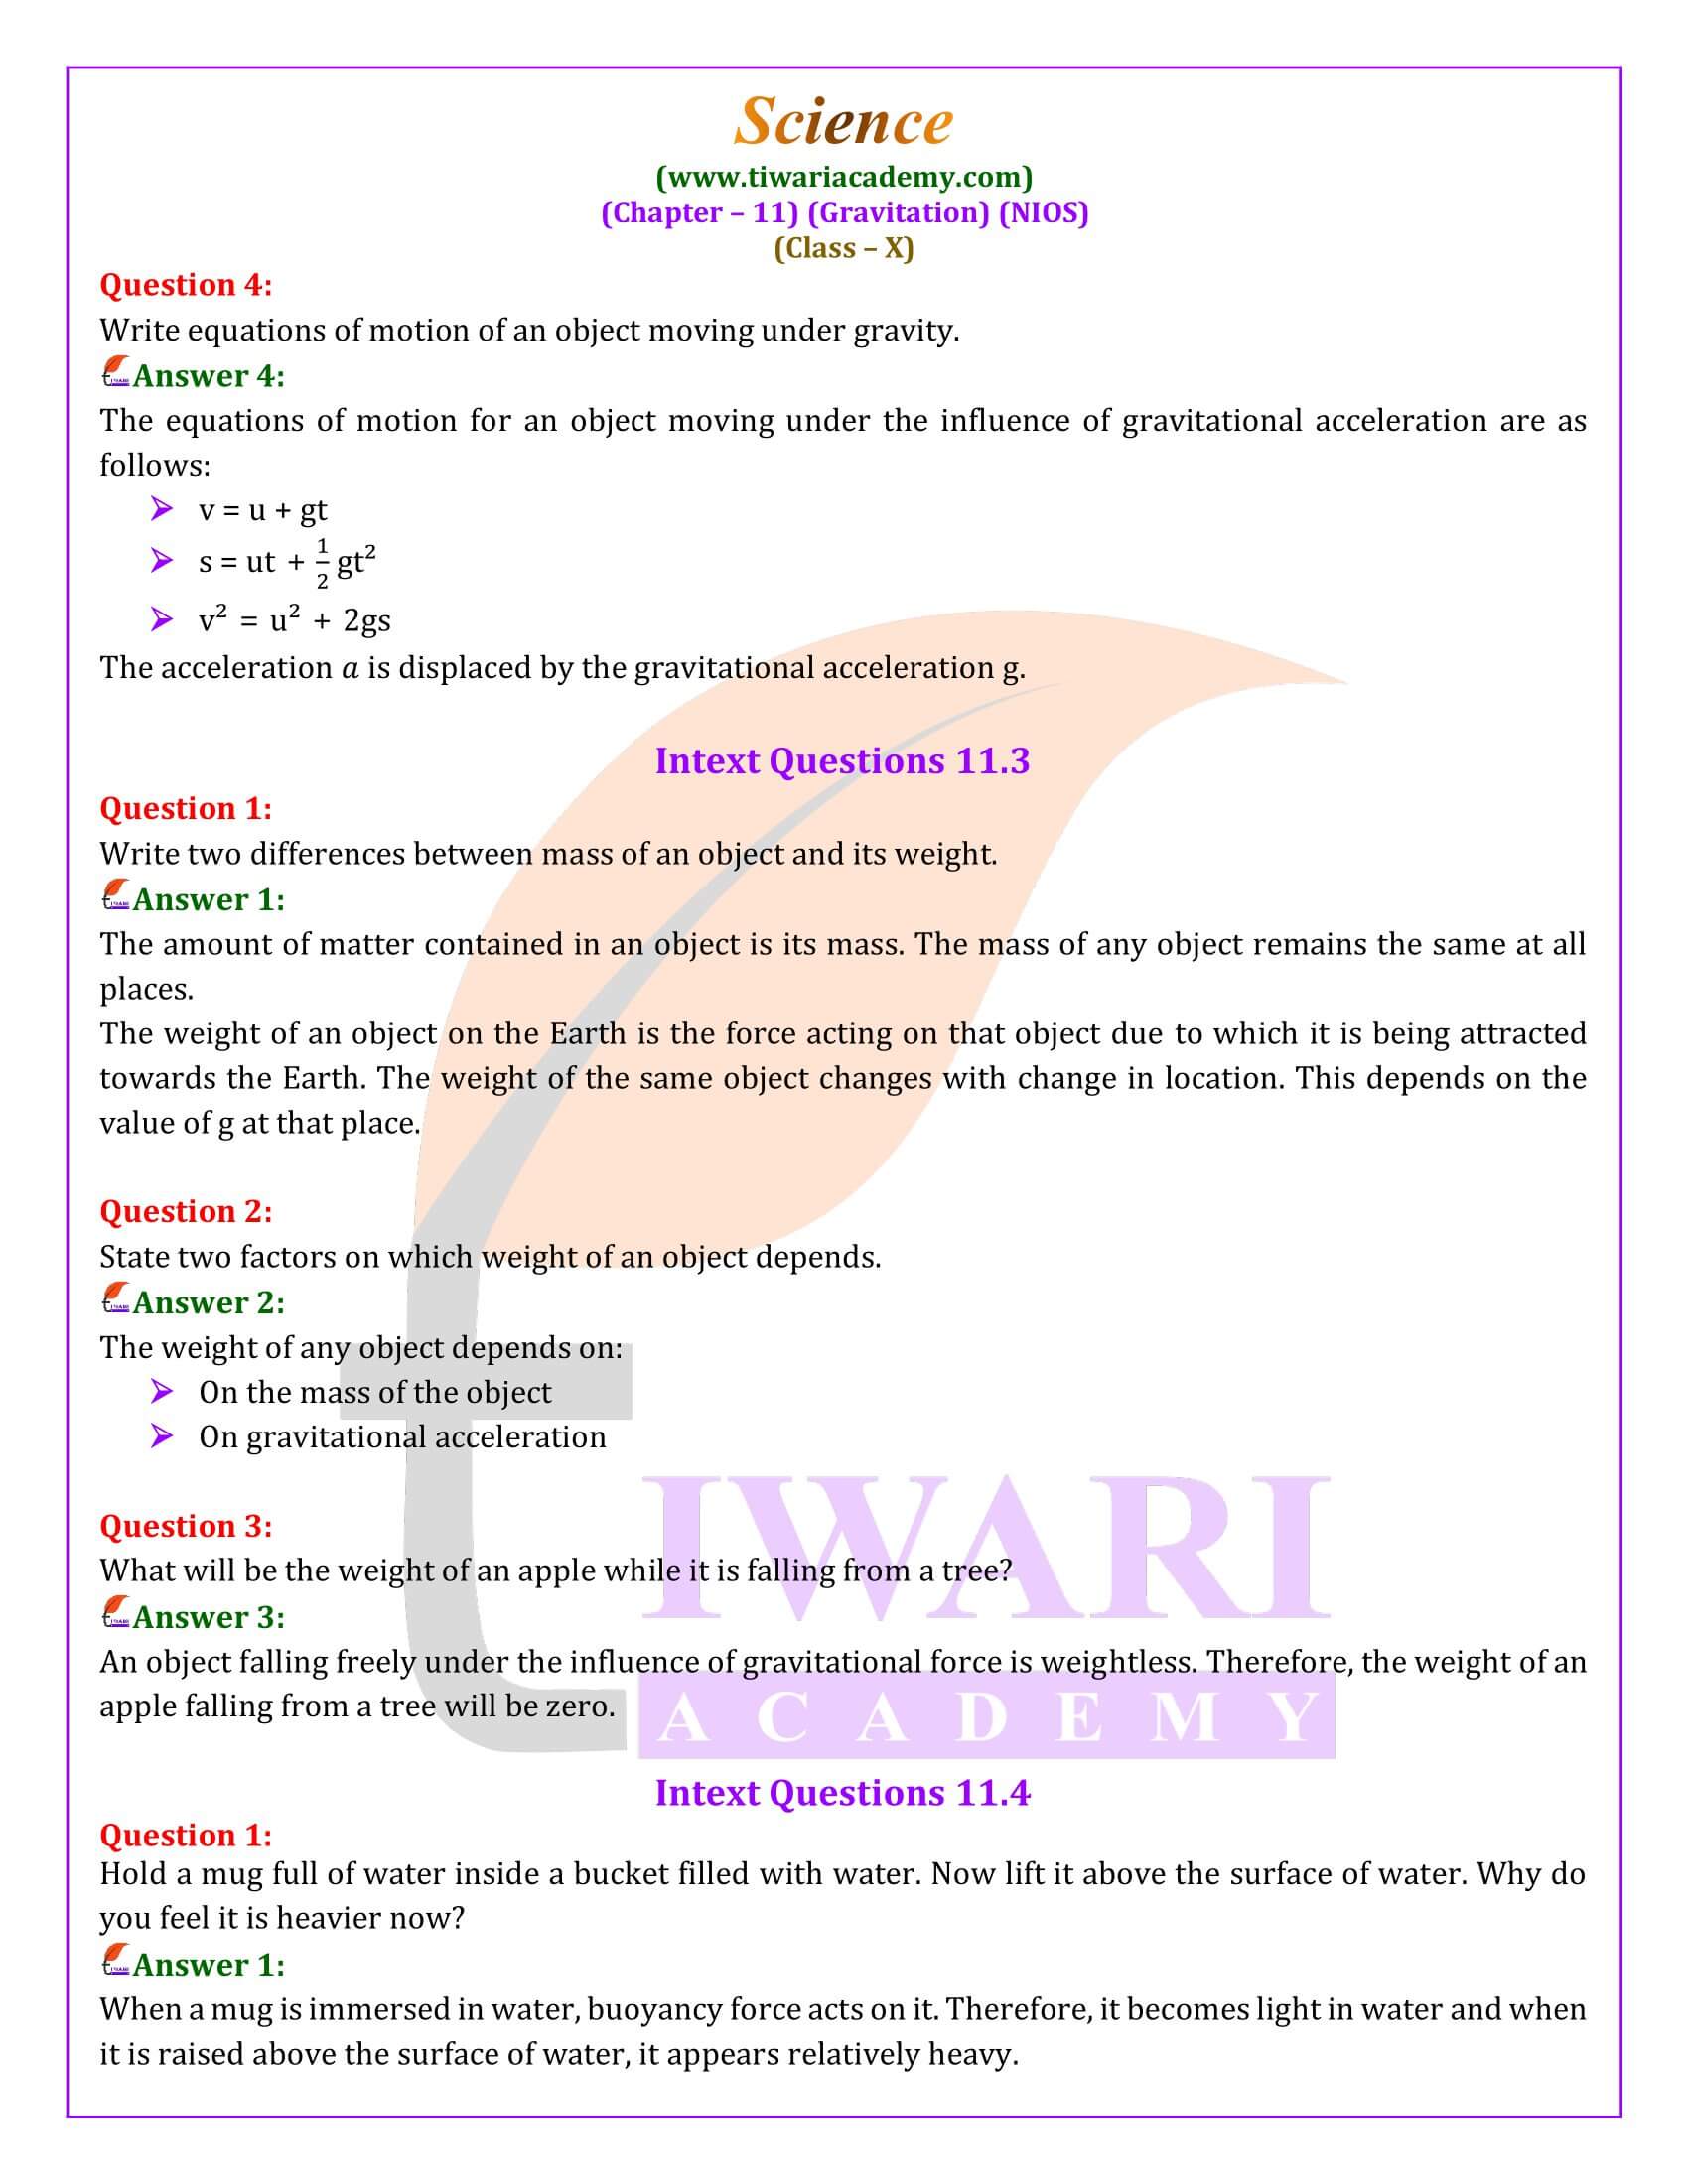 NIOS Class 10 Science Chapter 11 Gravitation Question Answers